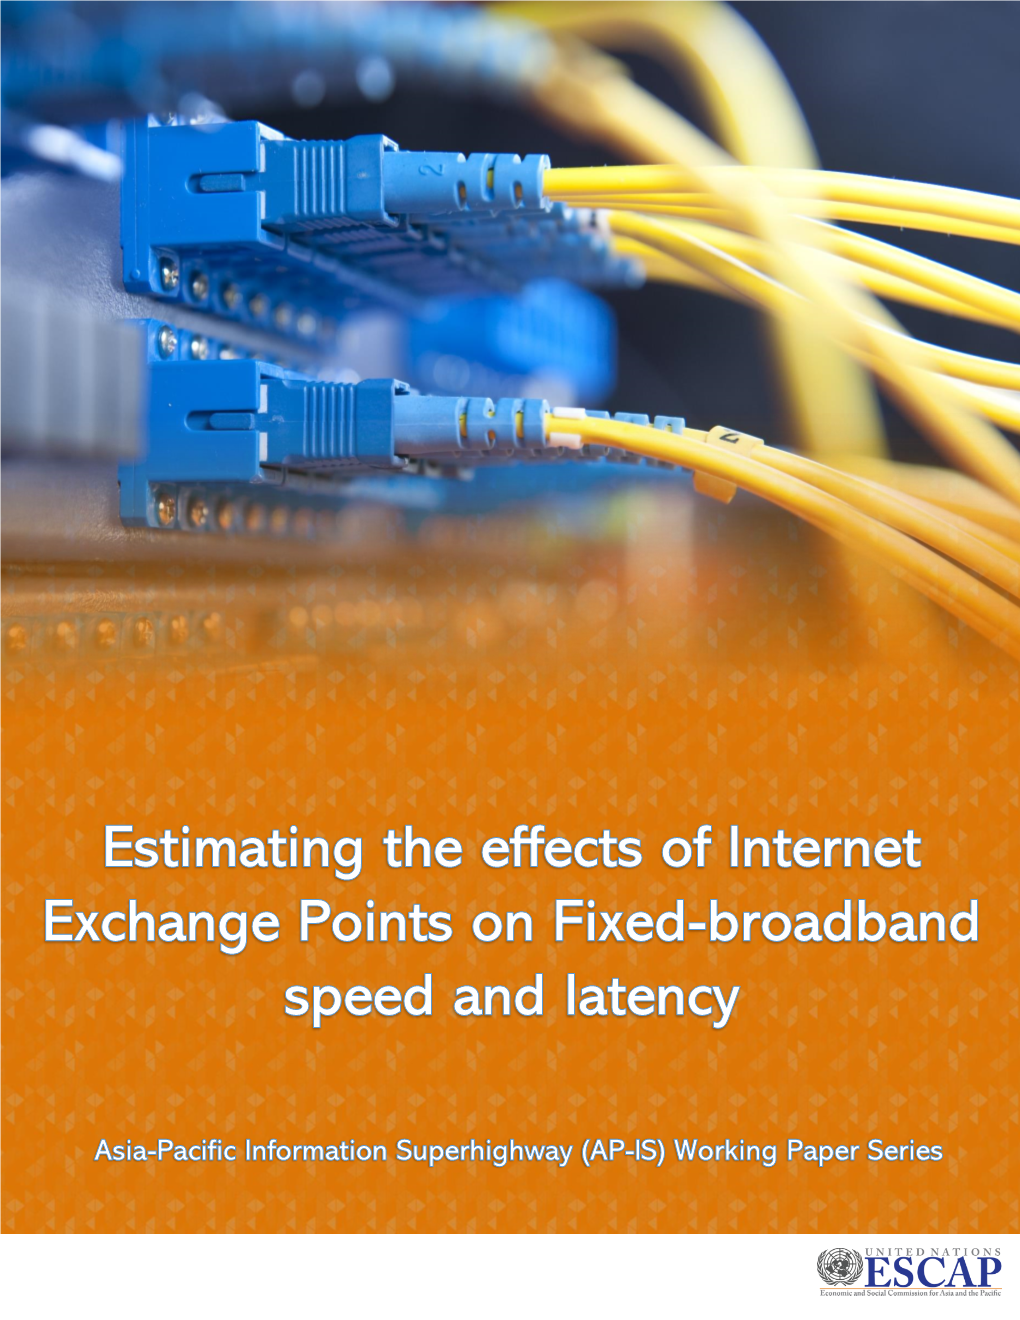 Estimating the Effects of Internet Exchange Points on Fixed